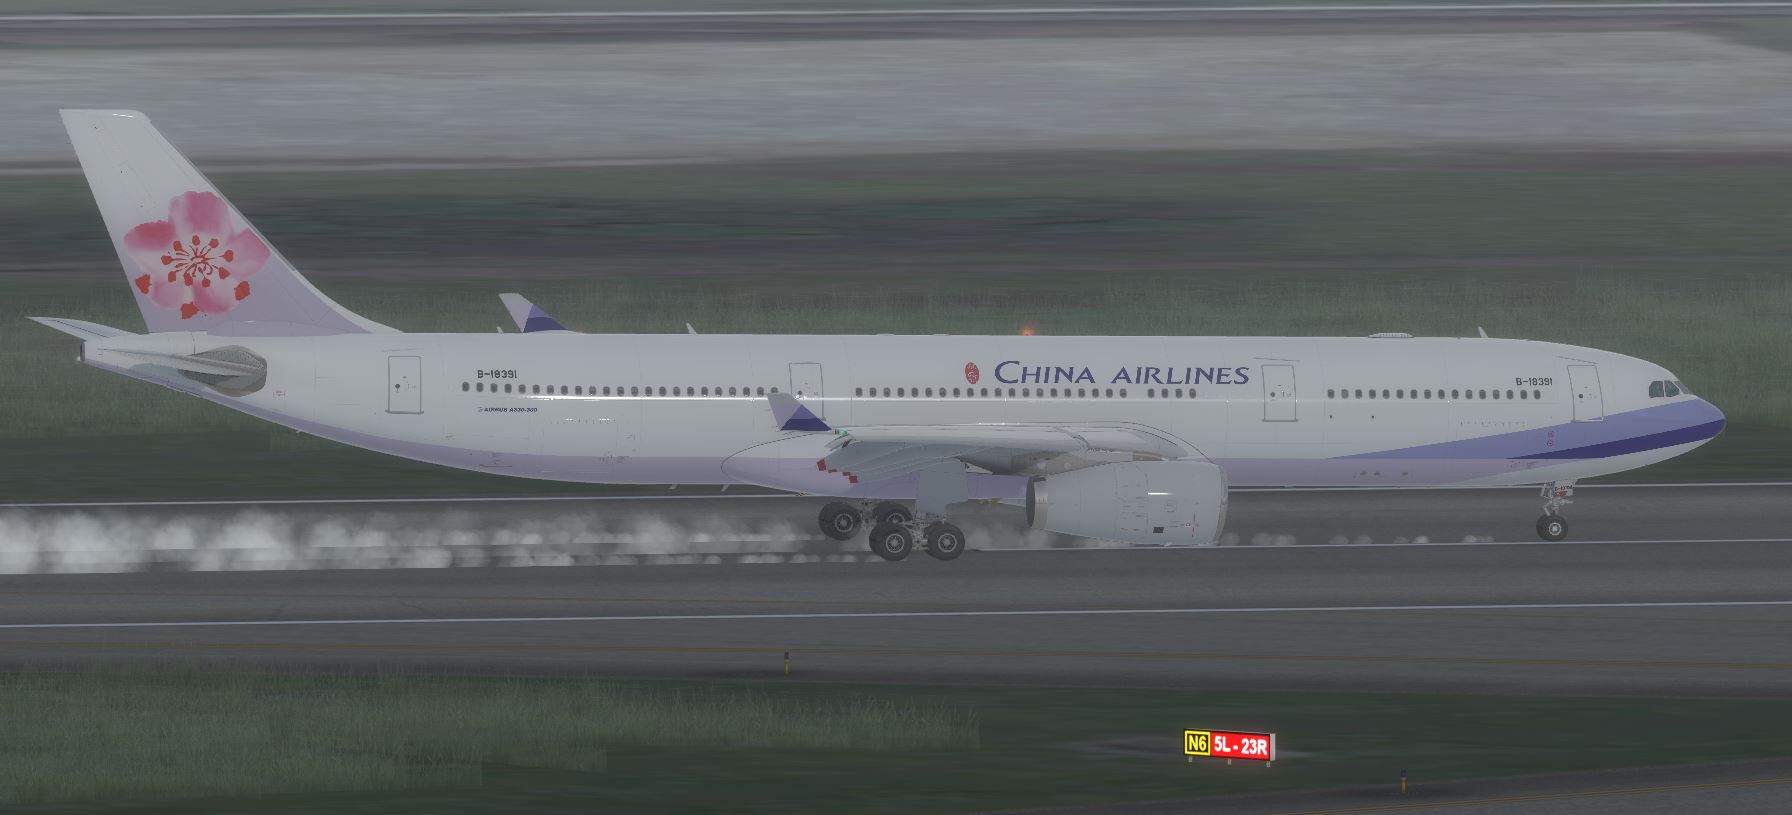 AS A330 ChinaAirline-9408 